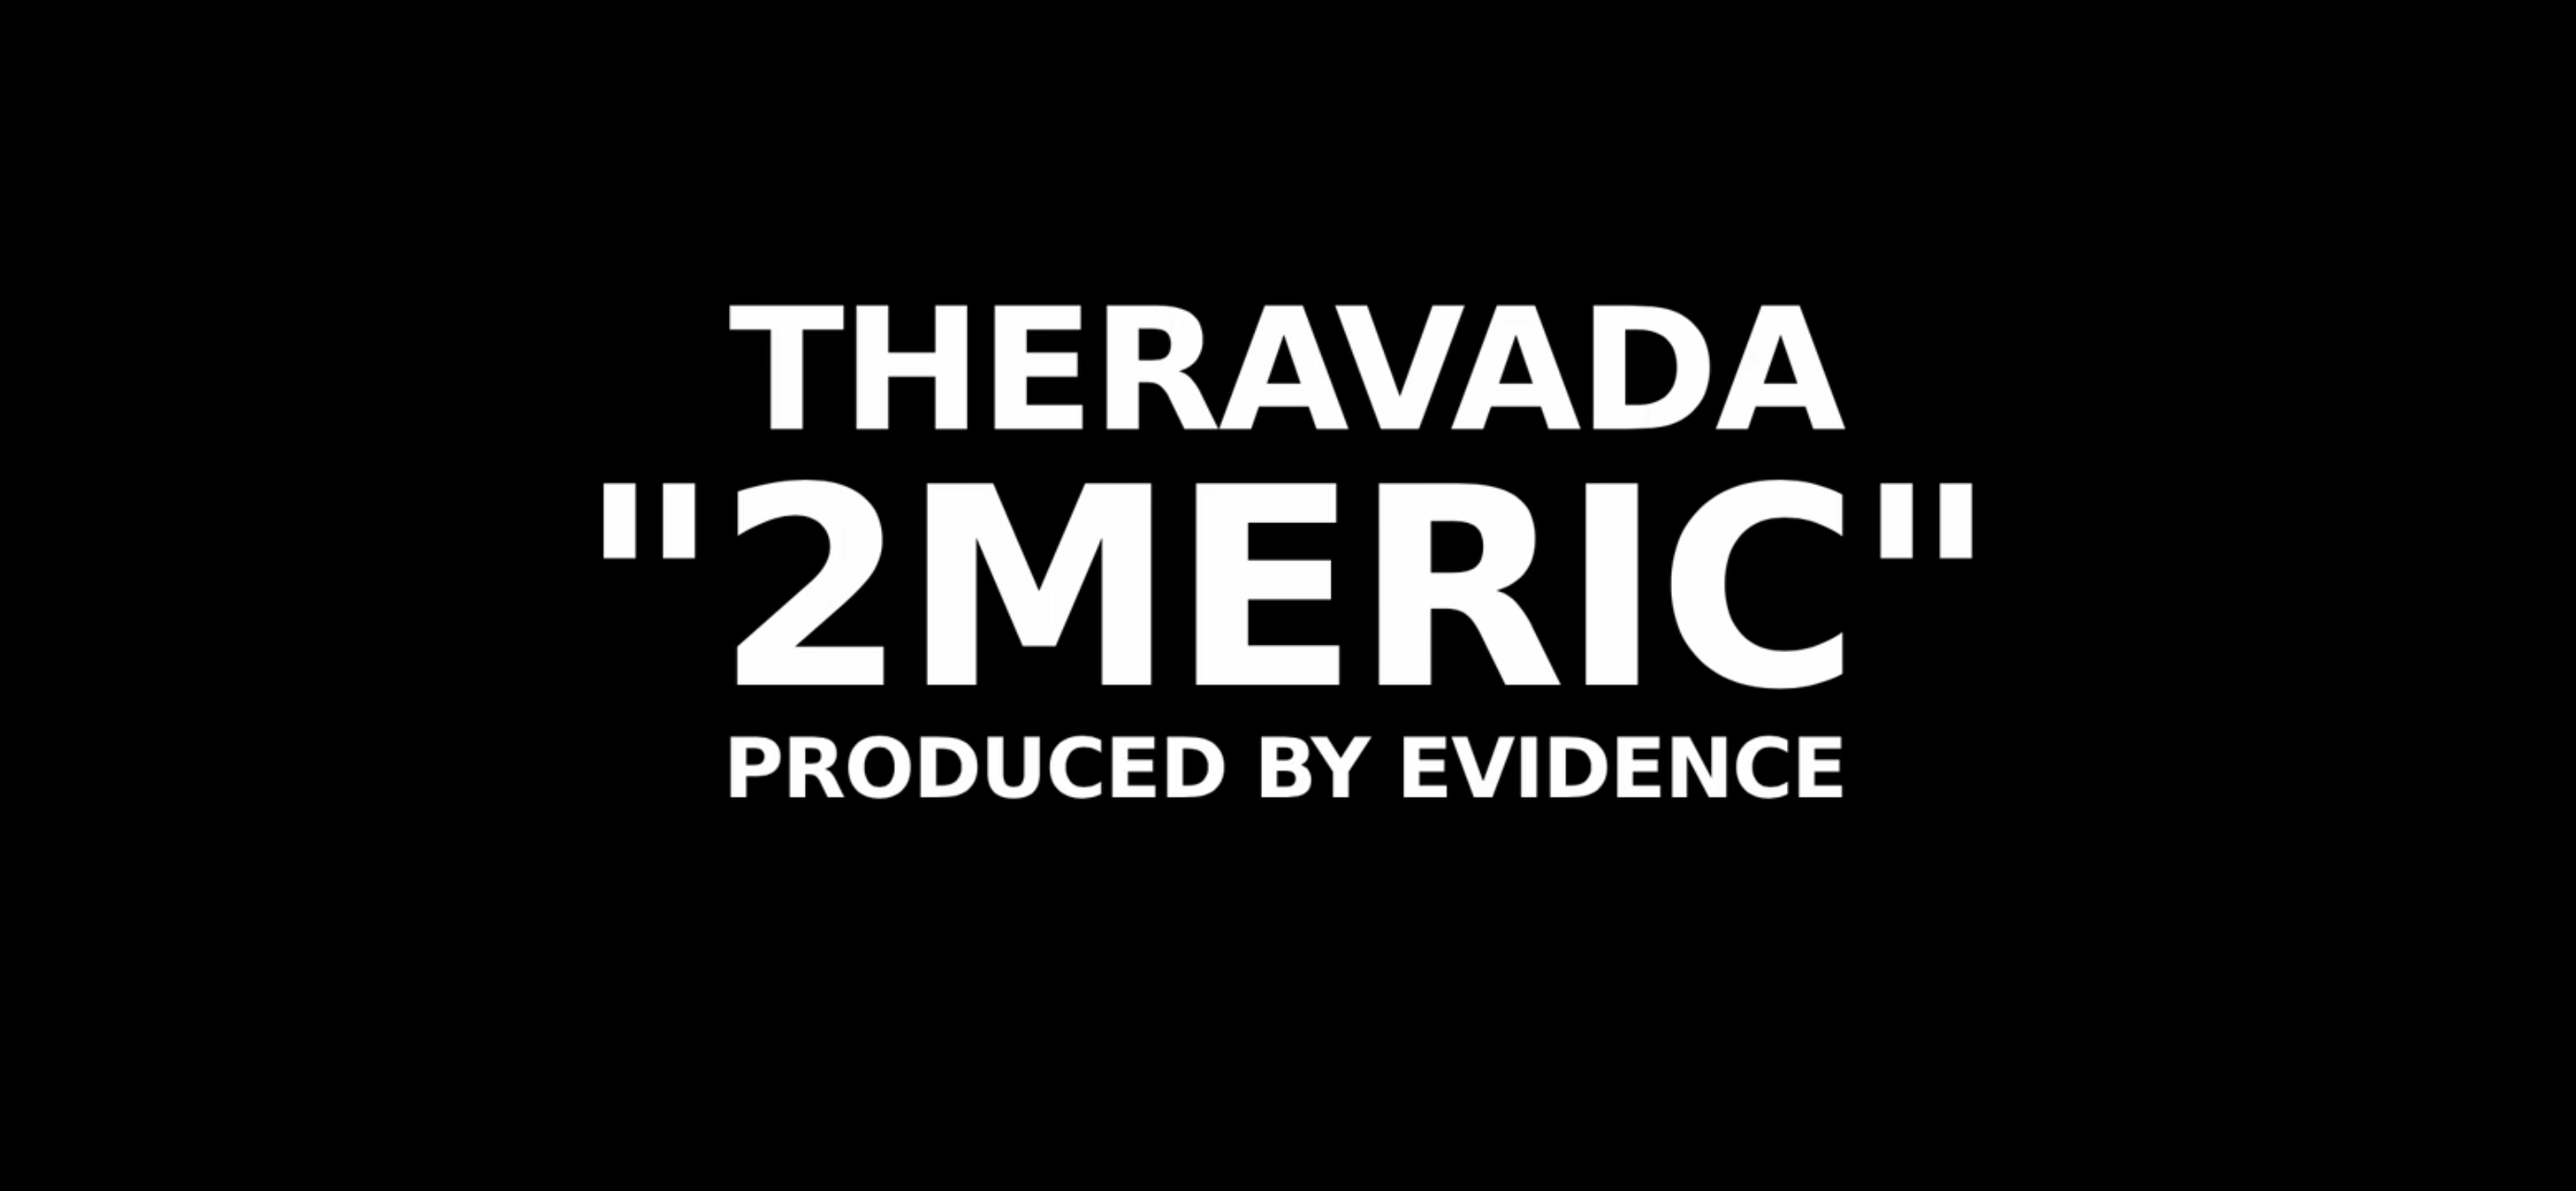 Theravada x Evidence - "2MERIC" [Official Music Video]